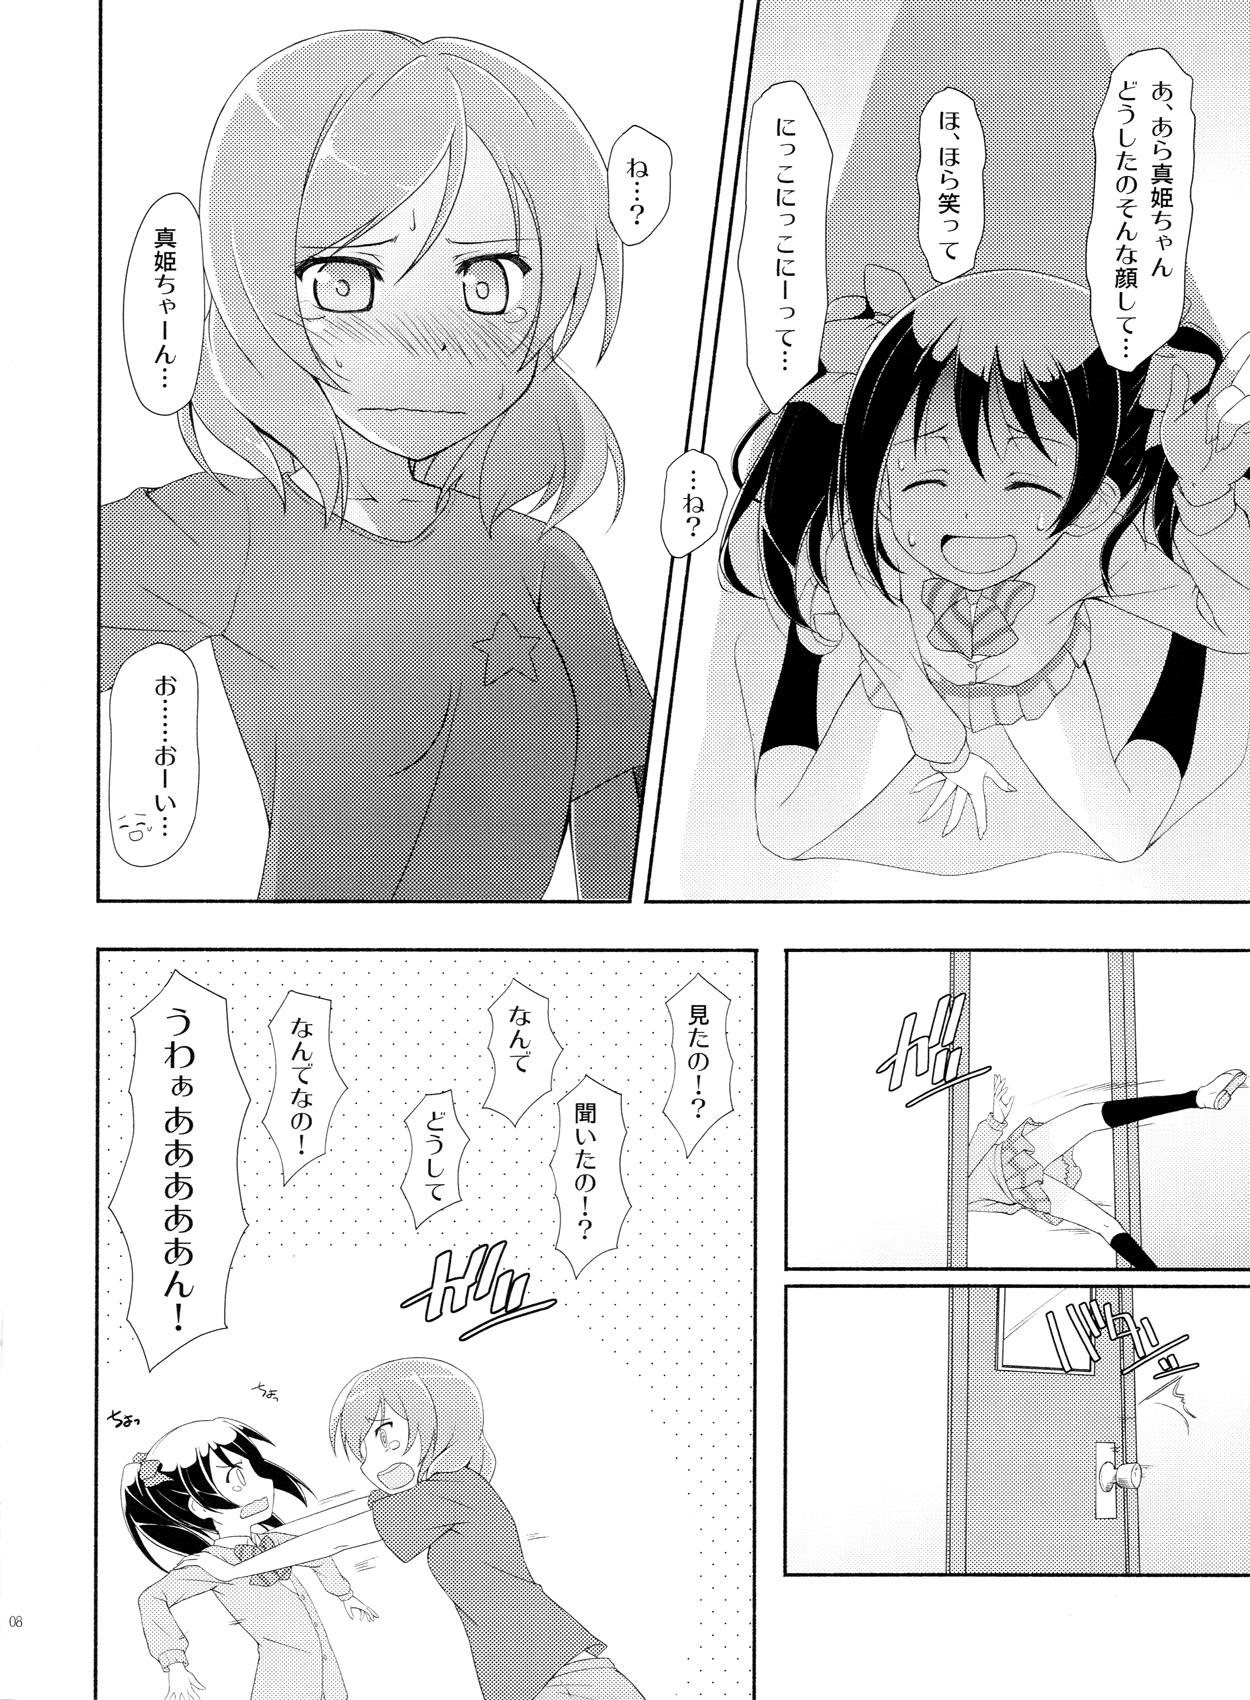 Pussylick Love White - Love live White Chick - Page 7